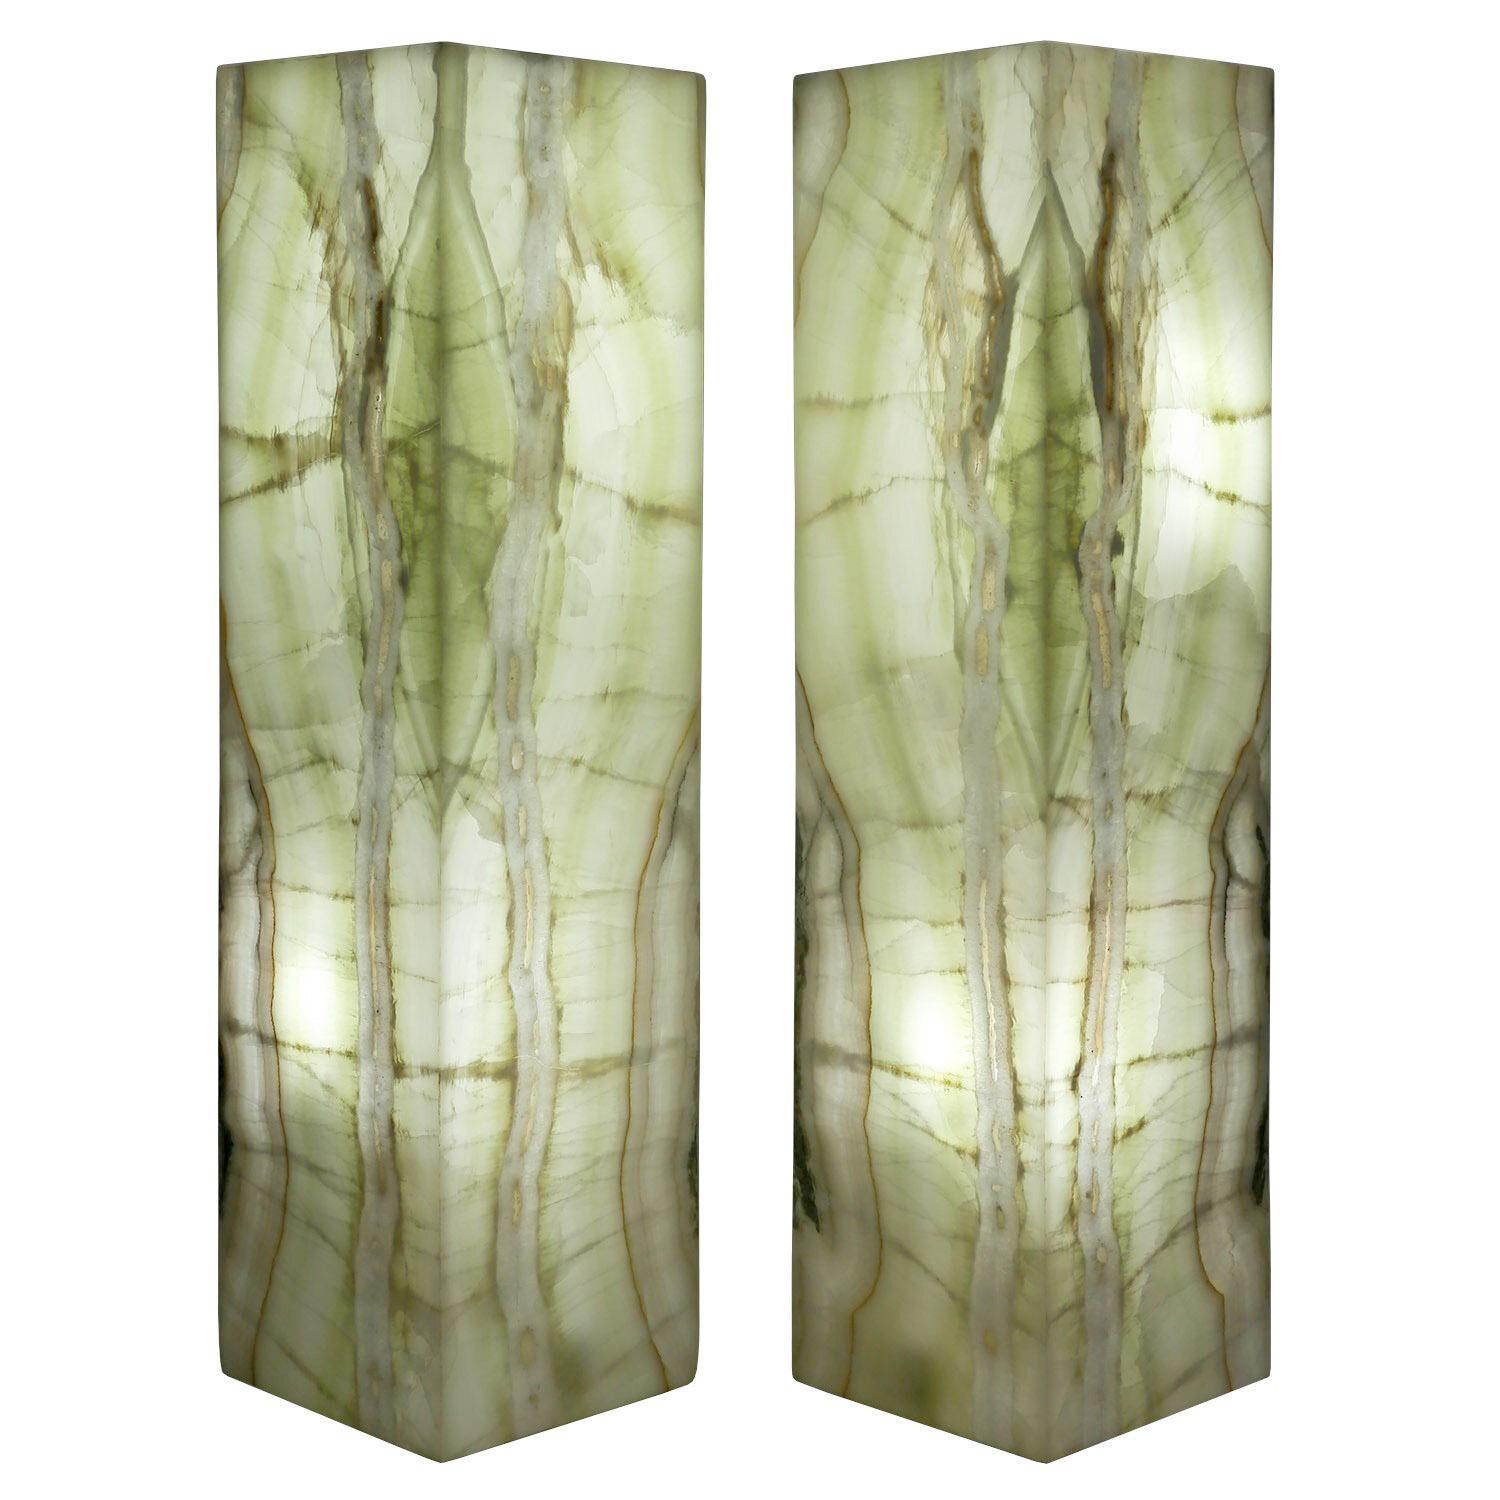 Set of 2 Tall Natural Onyx Table Lamps

Natural Polished Onyx
5-sided, open in the bottom to facilitate changing the bulbs
Measures: 32 x 8 x 8 in. / 81 x 20 x 20 cm
These pale green lamps are an excellent way to create ambiance and provide